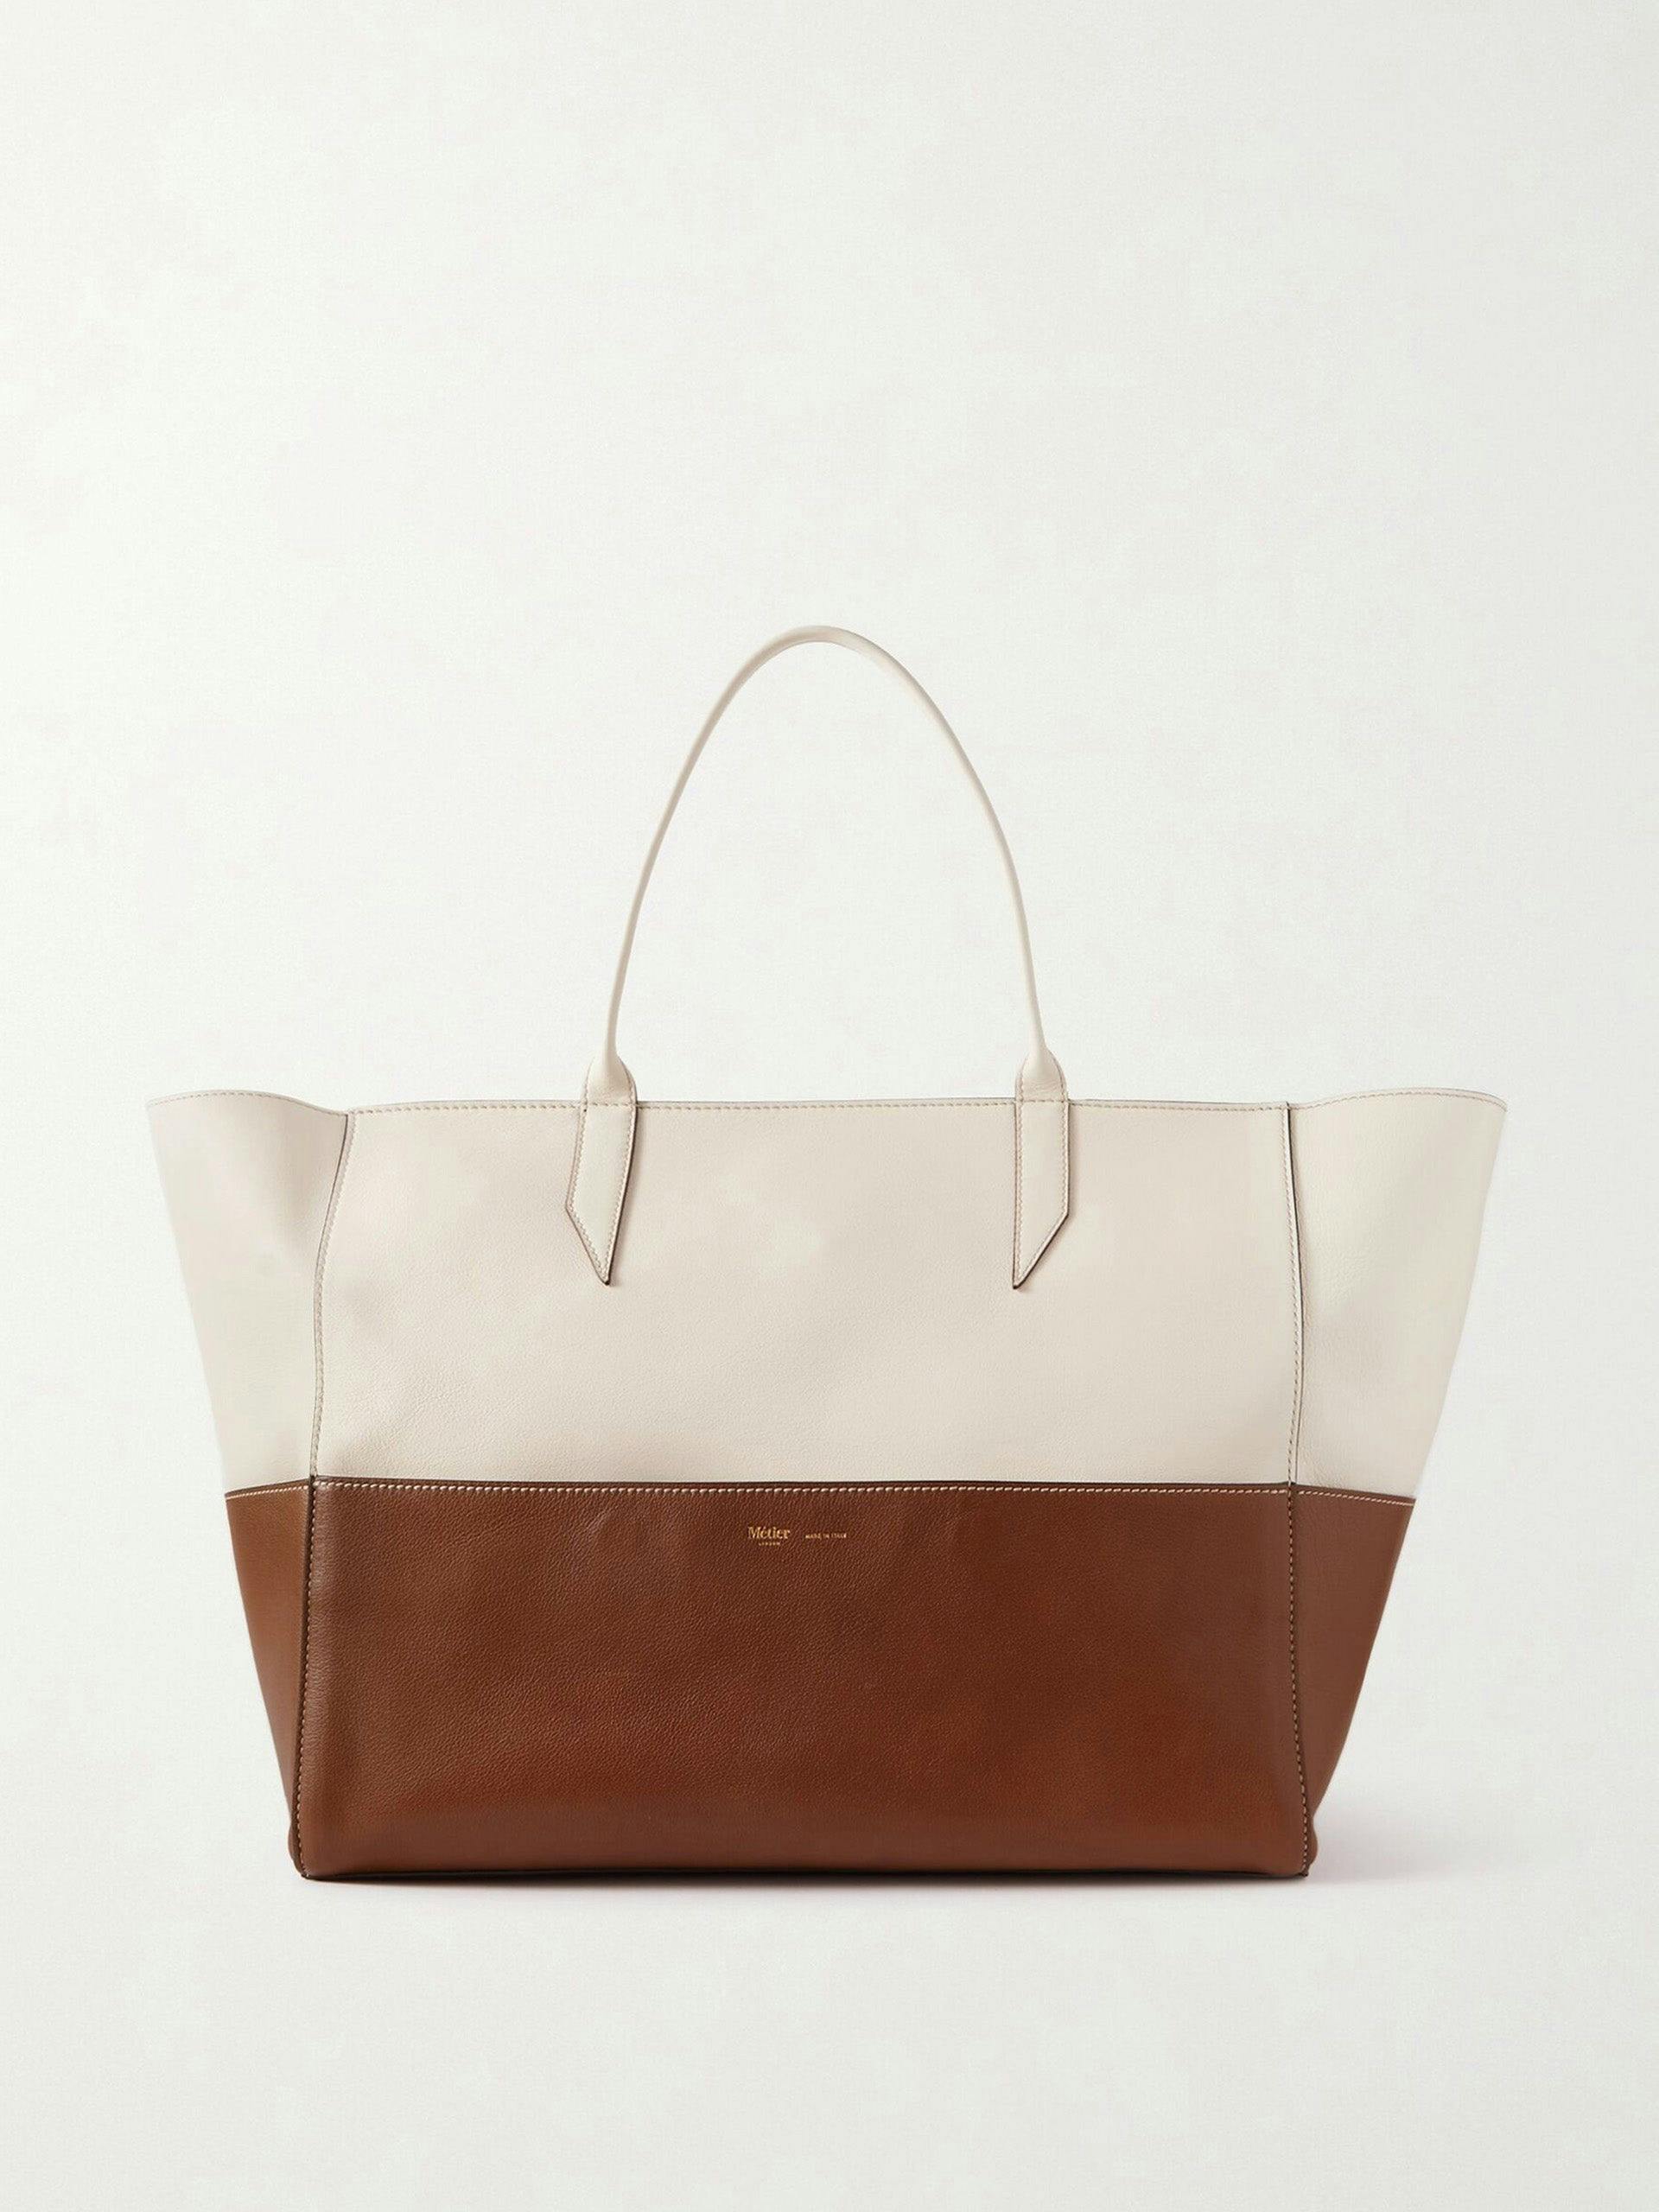 Incognito large two-tone leather tote